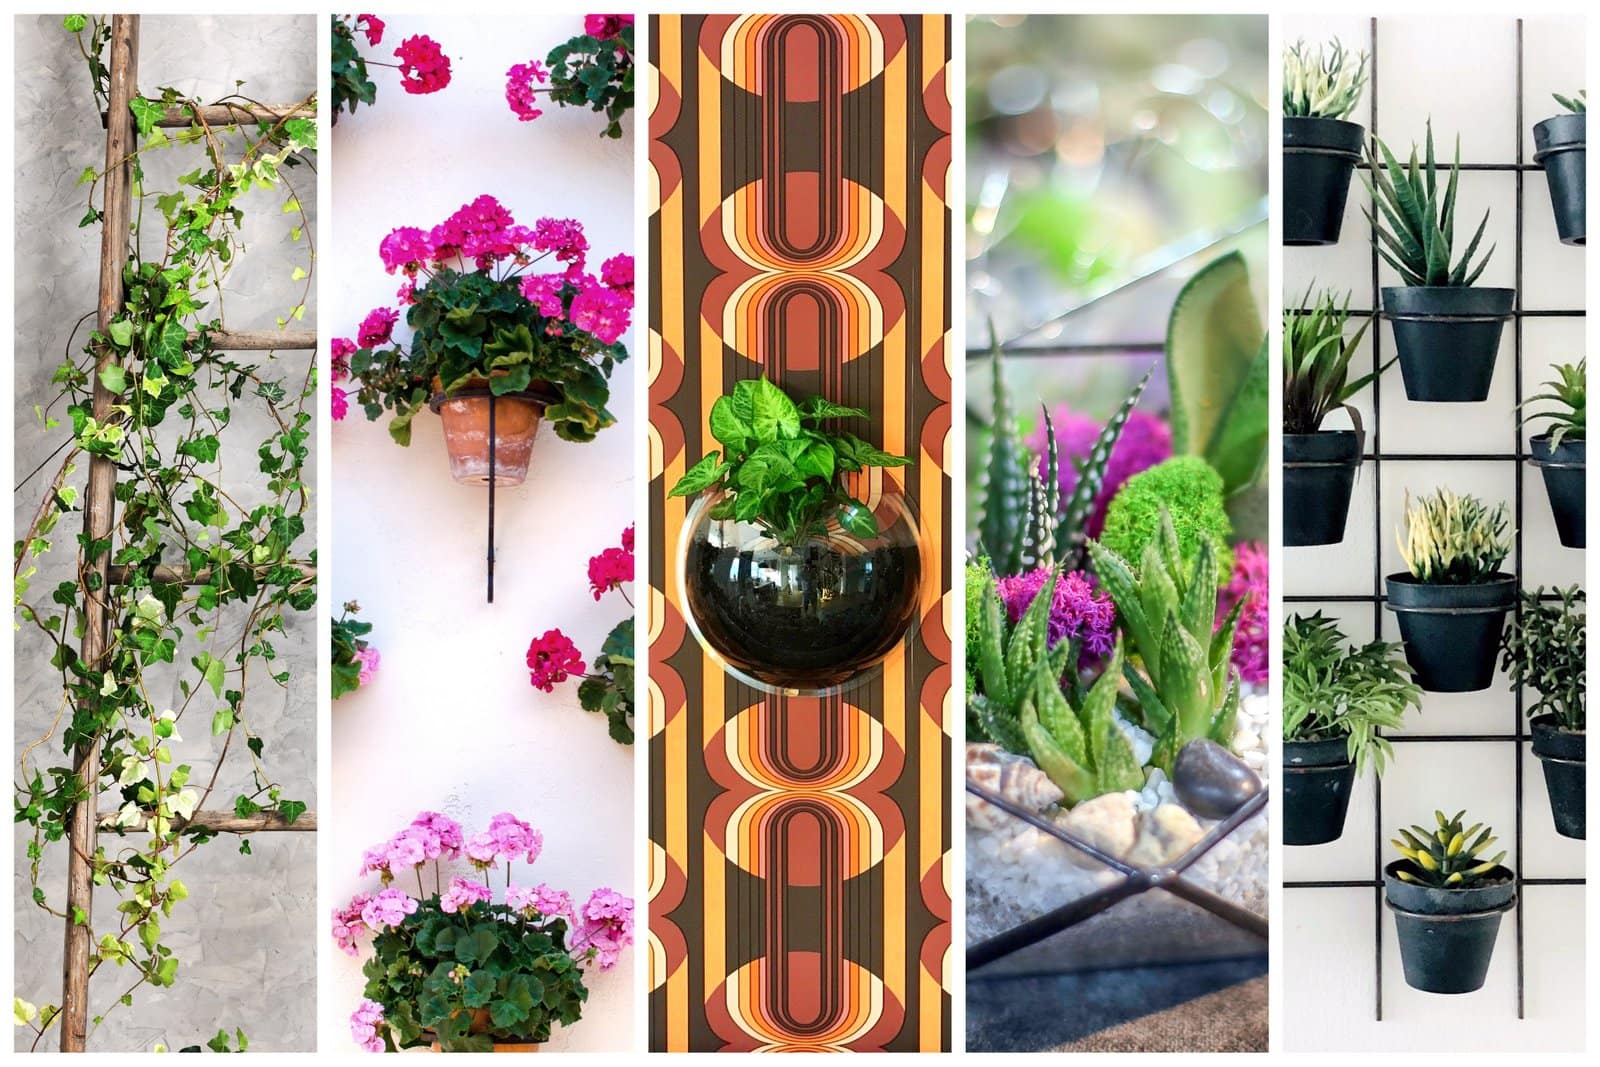 21 creative indoor plant decorating ideas and none of them are ...